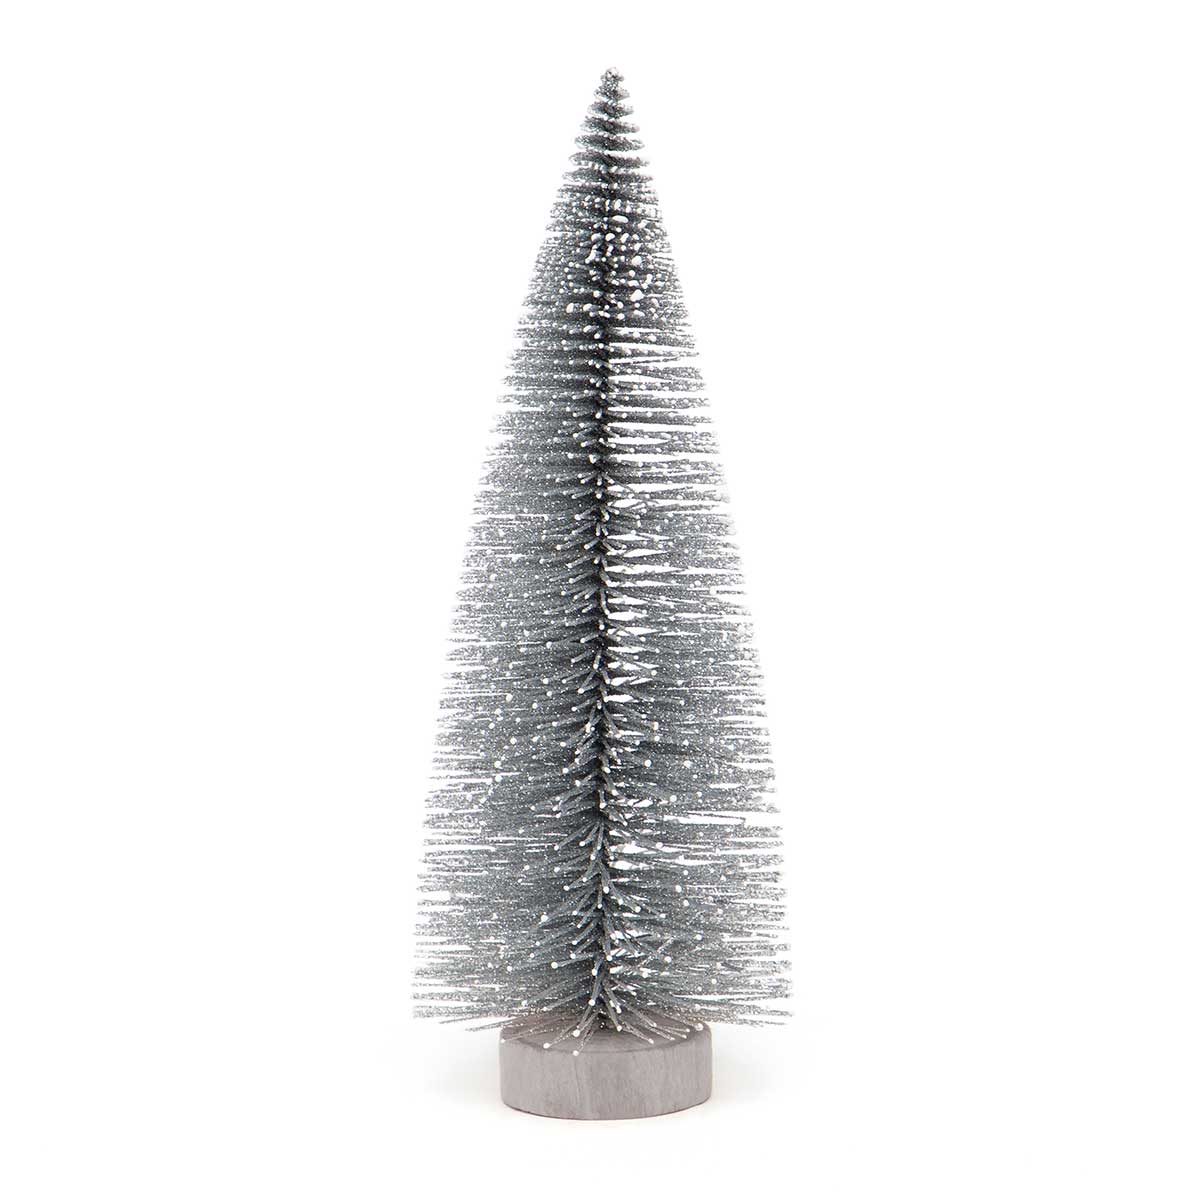 !BRISTLE TREE SILVER WITH SNOWY TIPS, GLITTER AND WOOD BASE